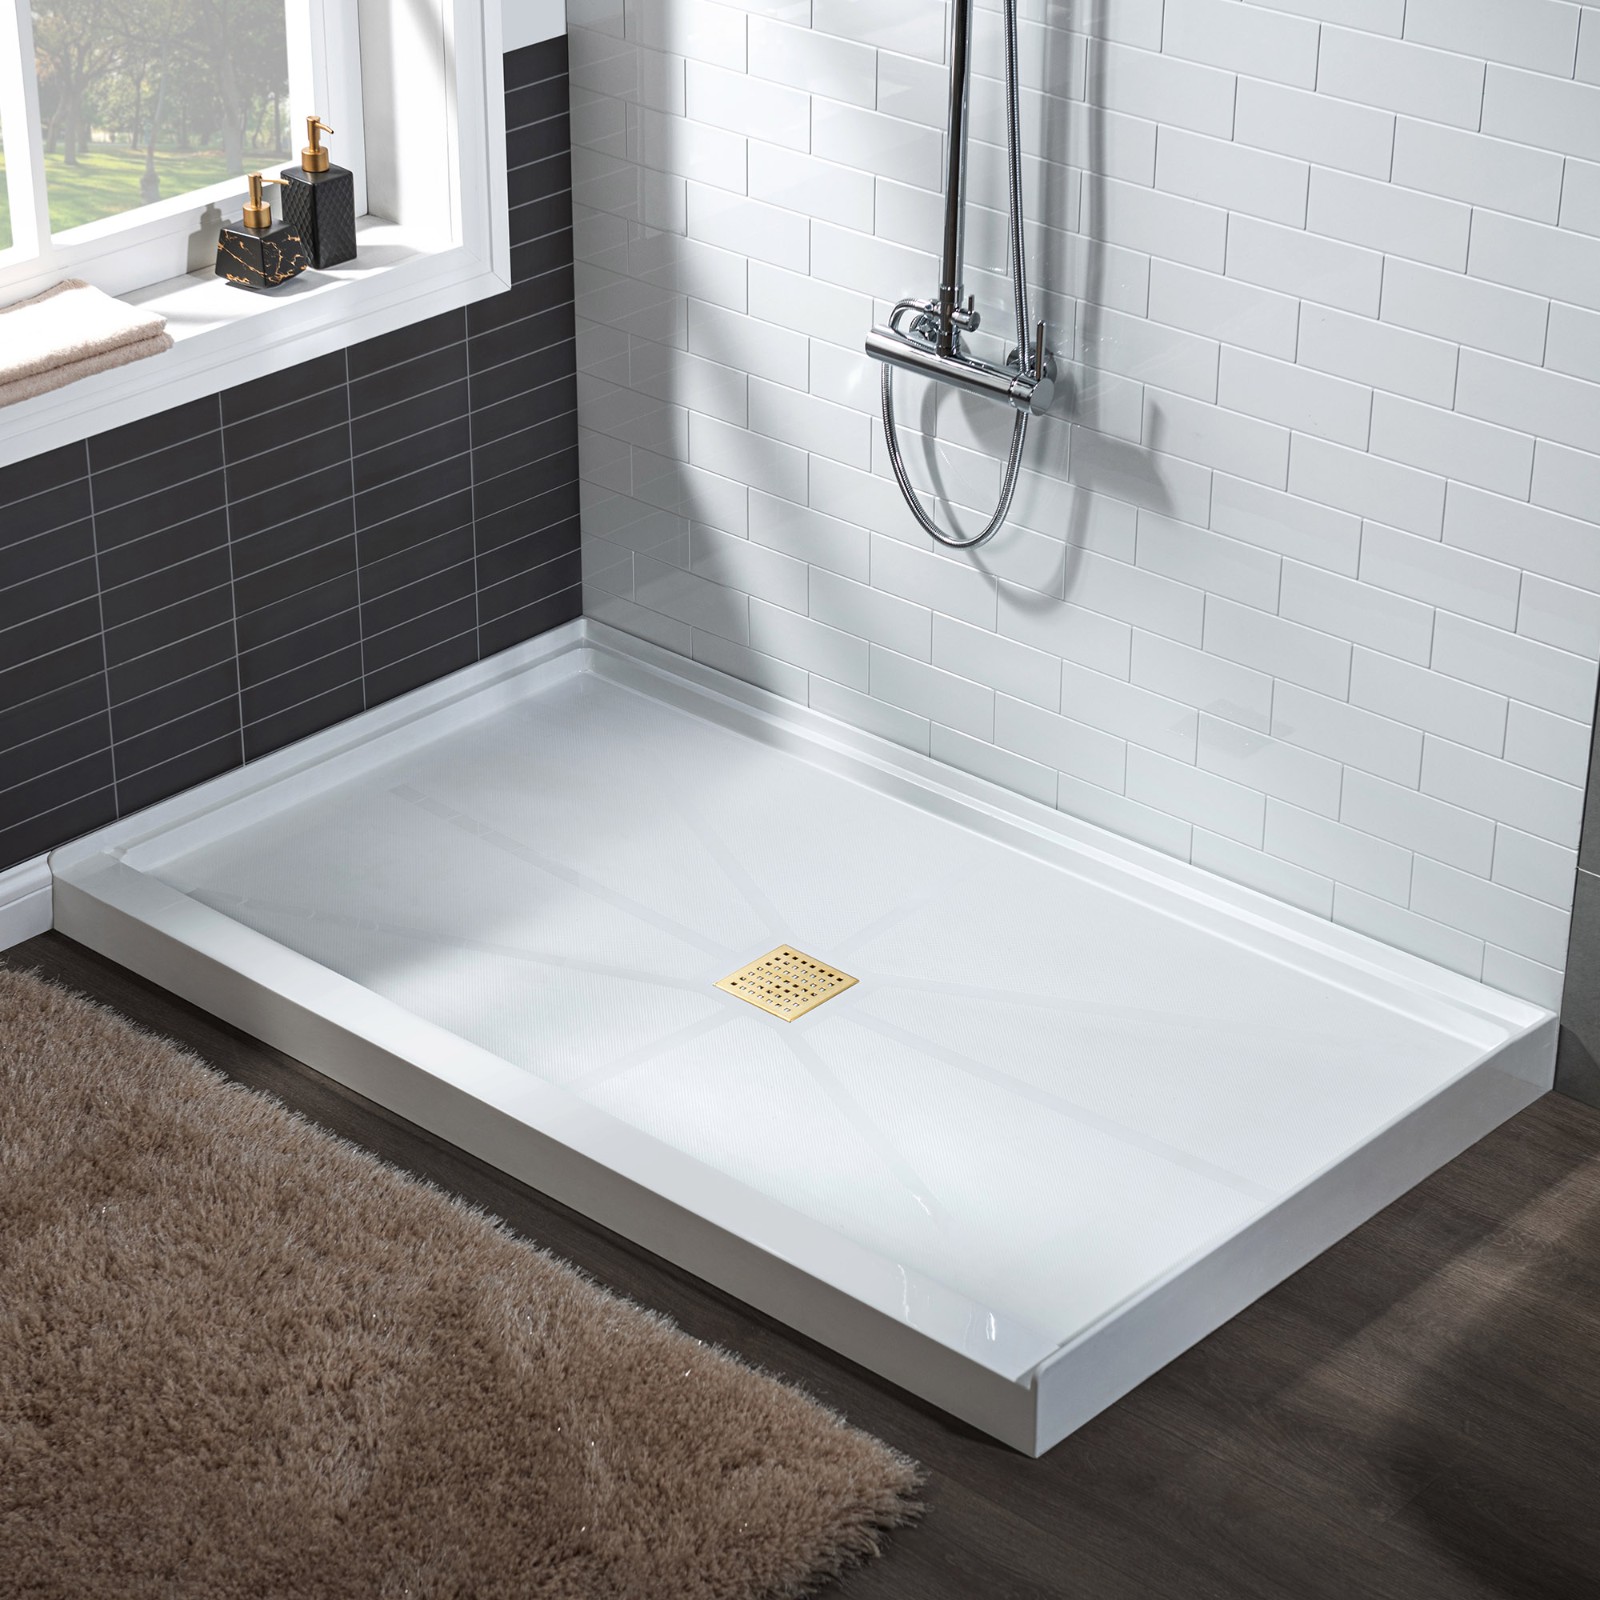  WOODBRIDGE SBR6030-1000C-BG SolidSurface Shower Base with Recessed Trench Side Including Brushed Gold Linear Cover, 60